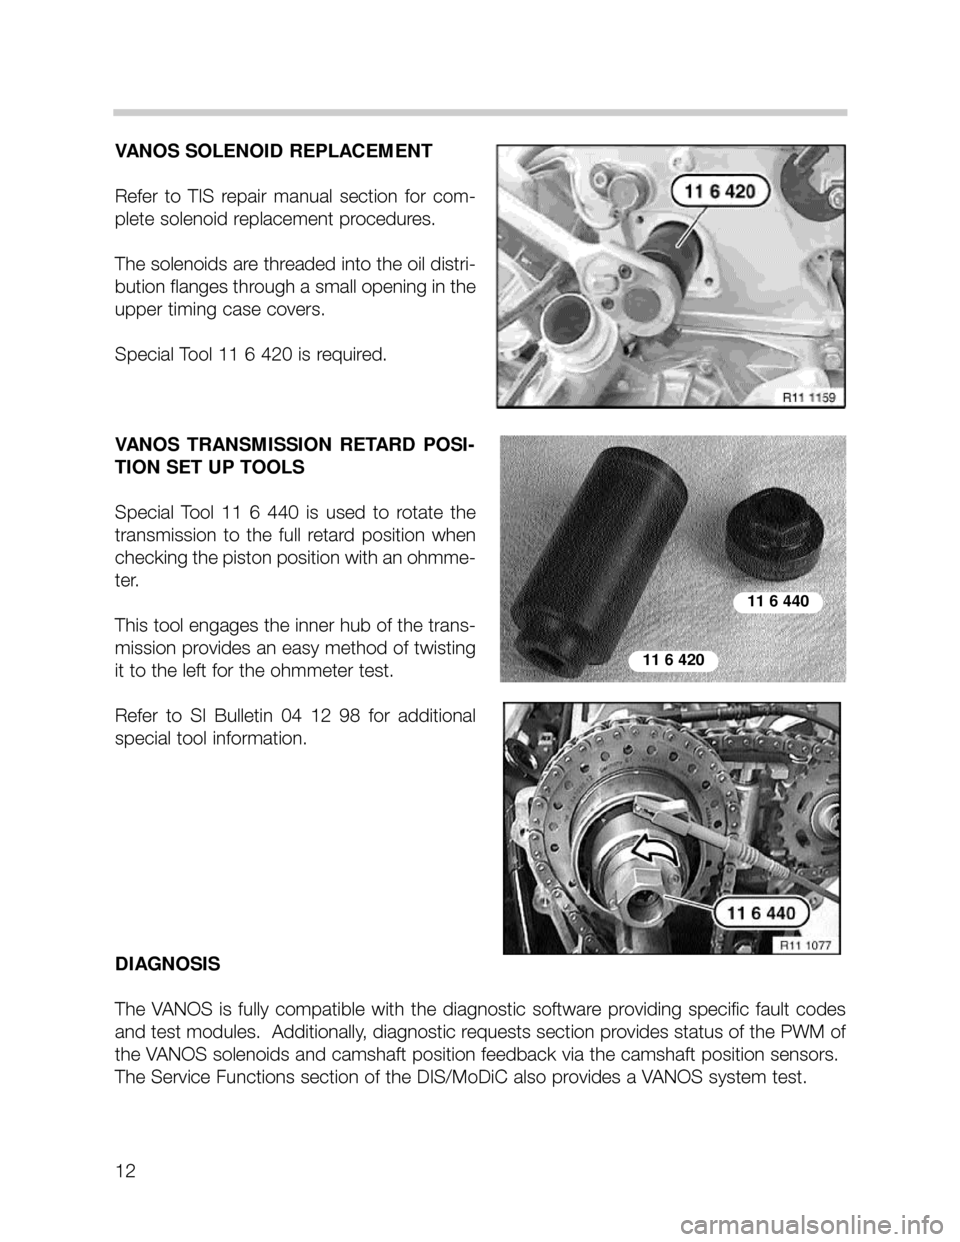 BMW 540i 1999 E39 M62TU Engine User Guide 12
VANOS SOLENOID REPLACEMENT
Refer  to  TIS  repair  manual  section  for  com-
plete solenoid replacement procedures.  
The solenoids are threaded into the oil distri-
bution flanges through a small